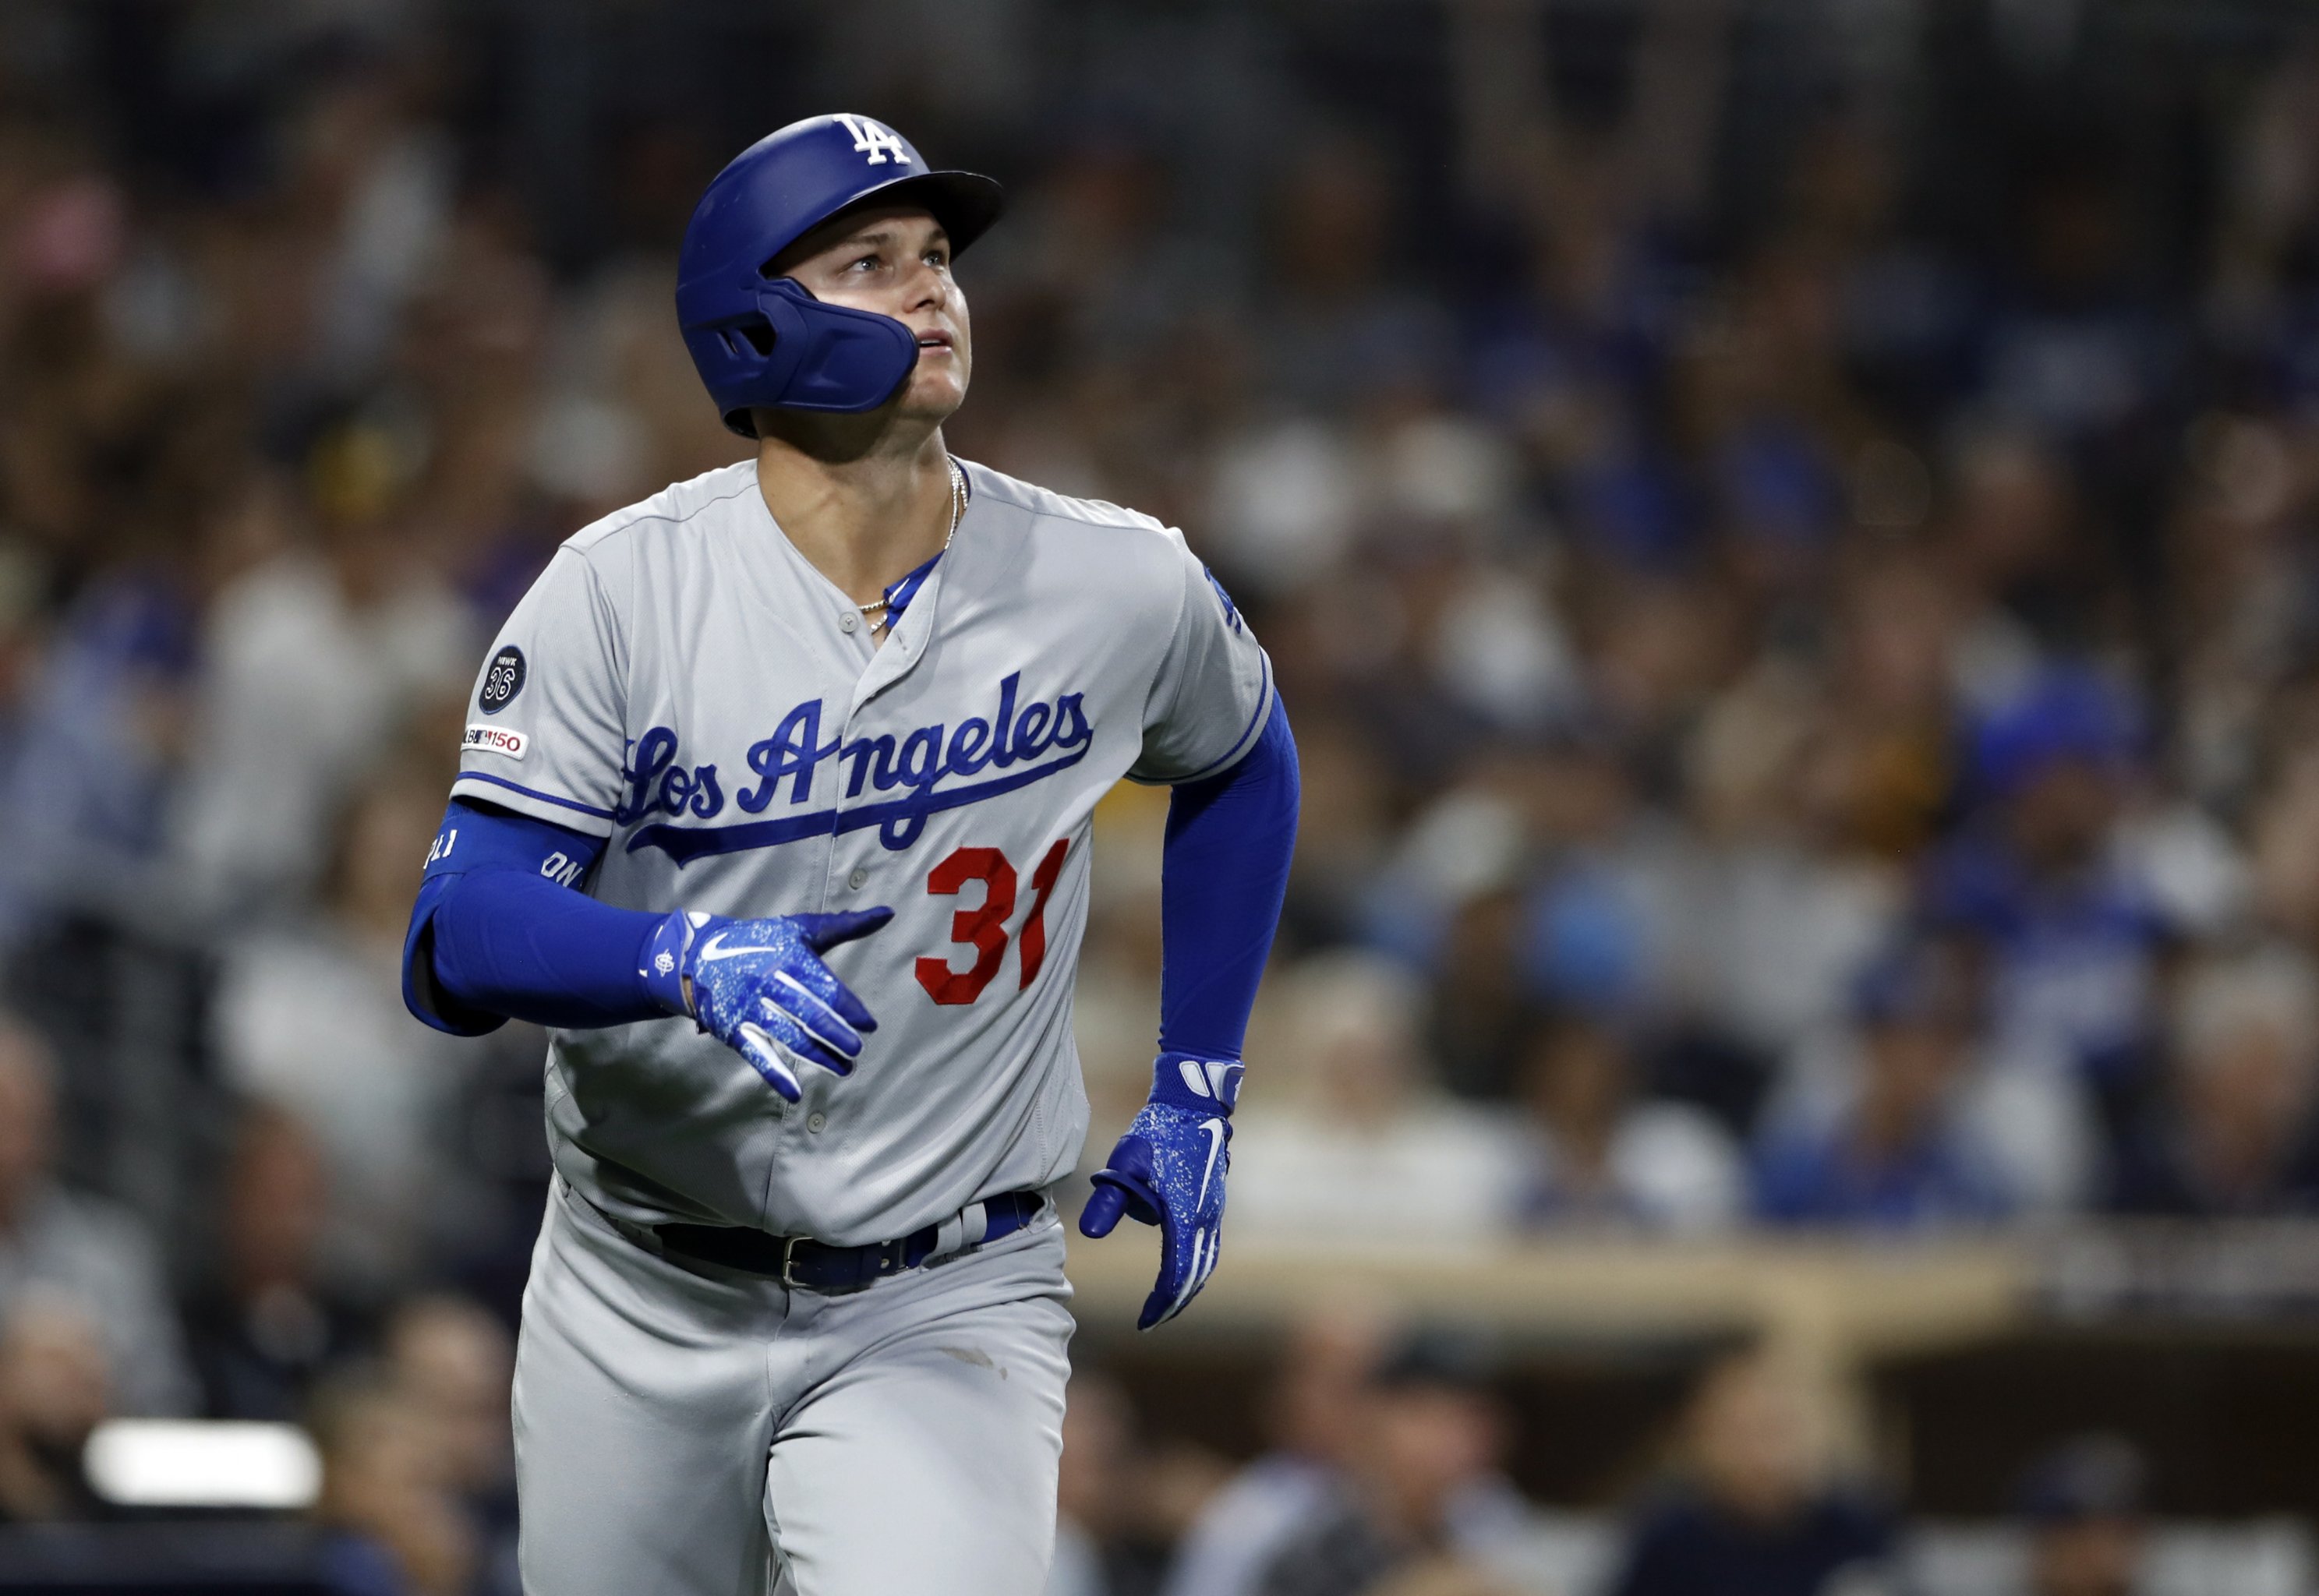 Cody Bellinger follows in dad's footsteps